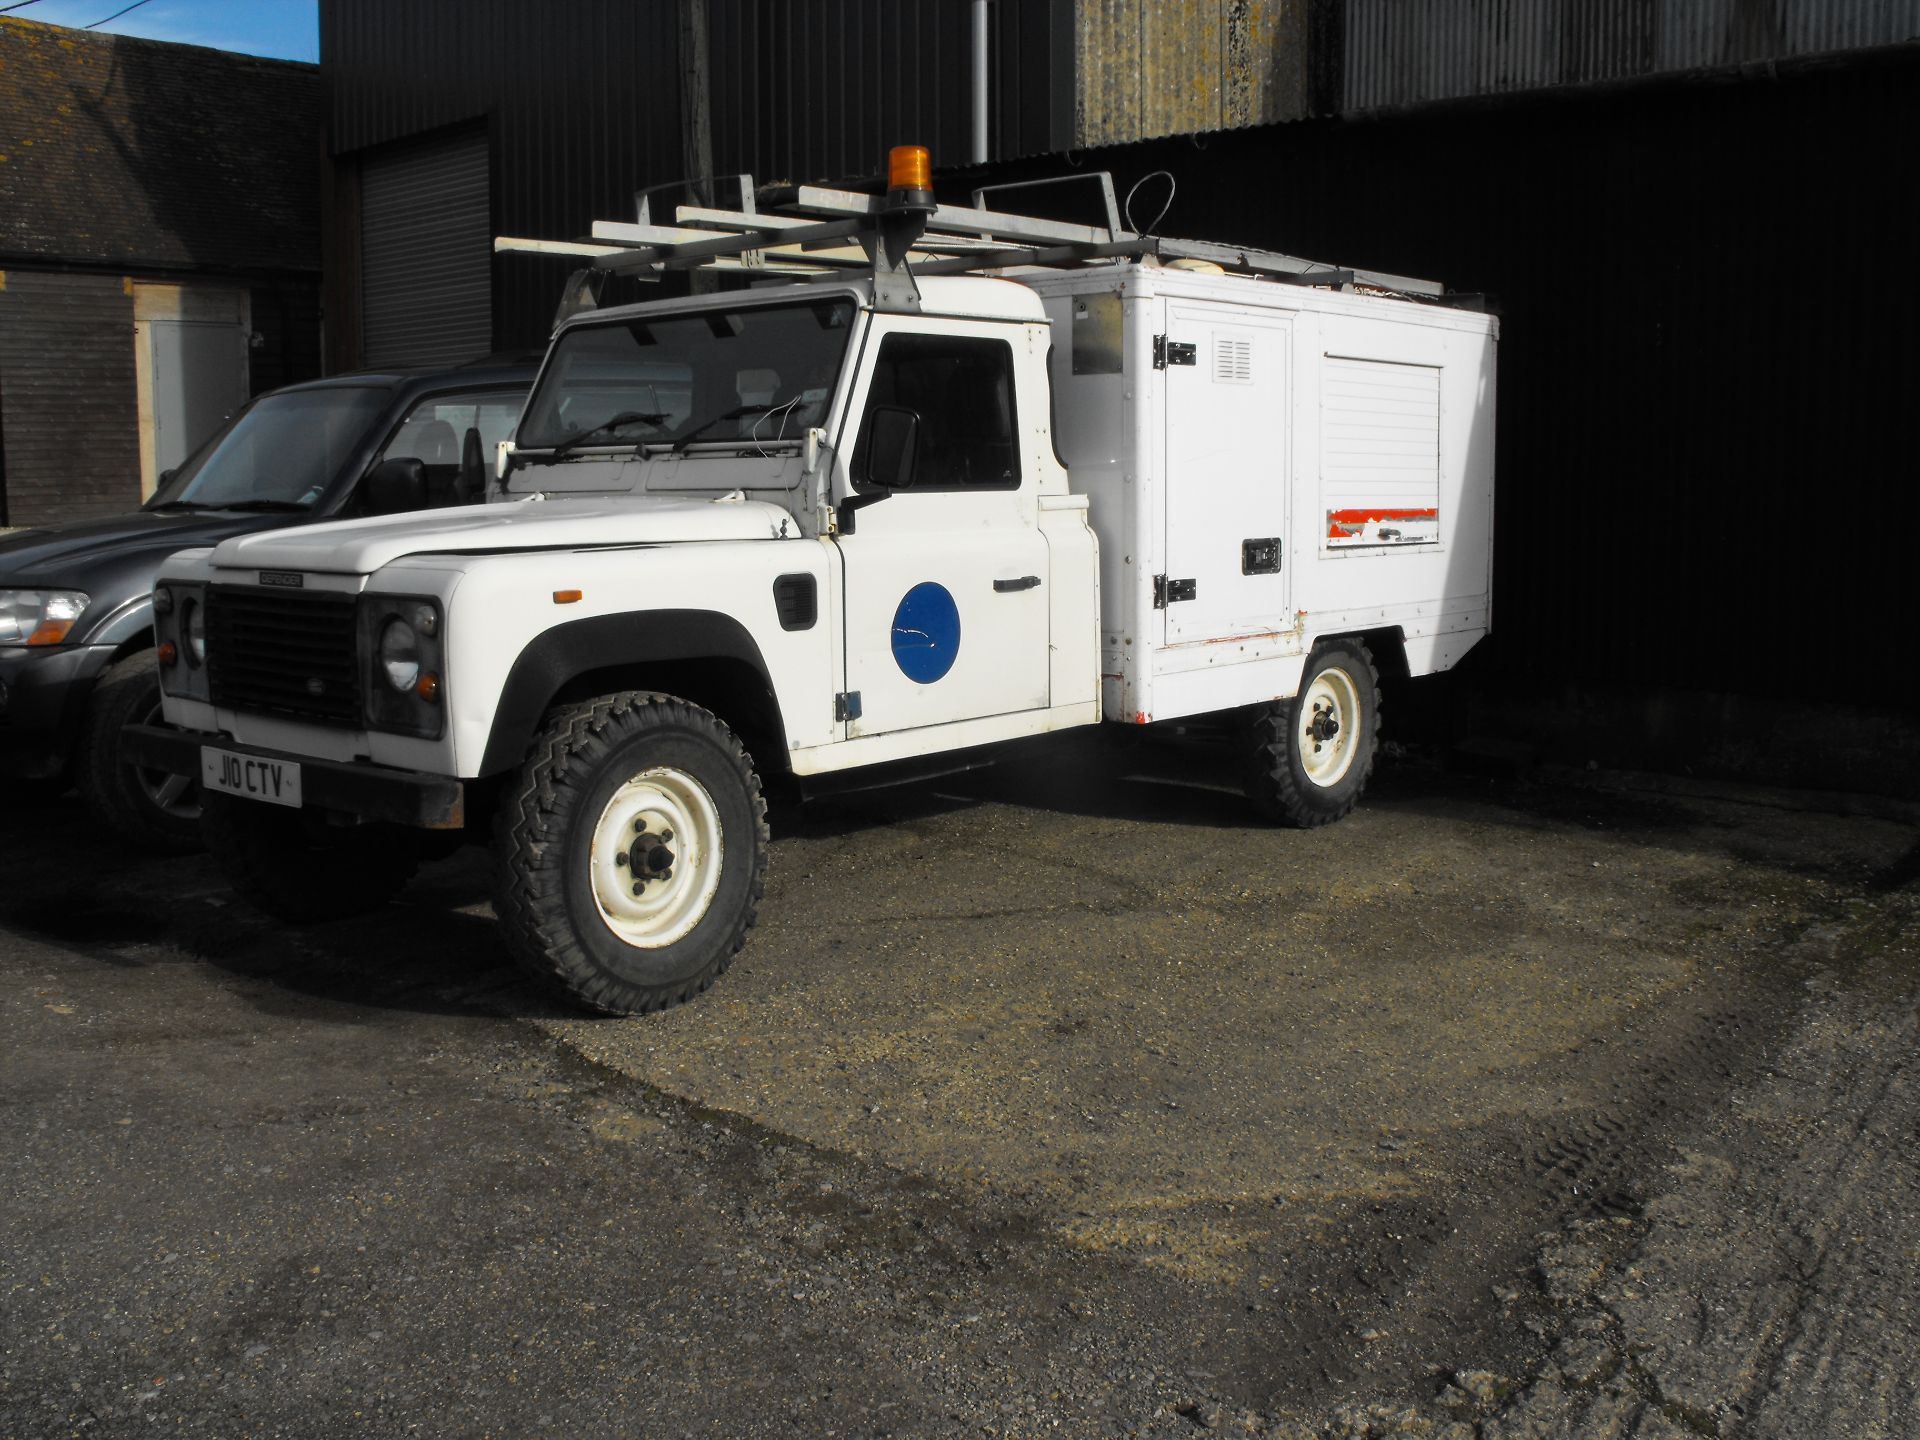 Land Rover Defender 130 duratech 1991 200tdi - Image 3 of 7